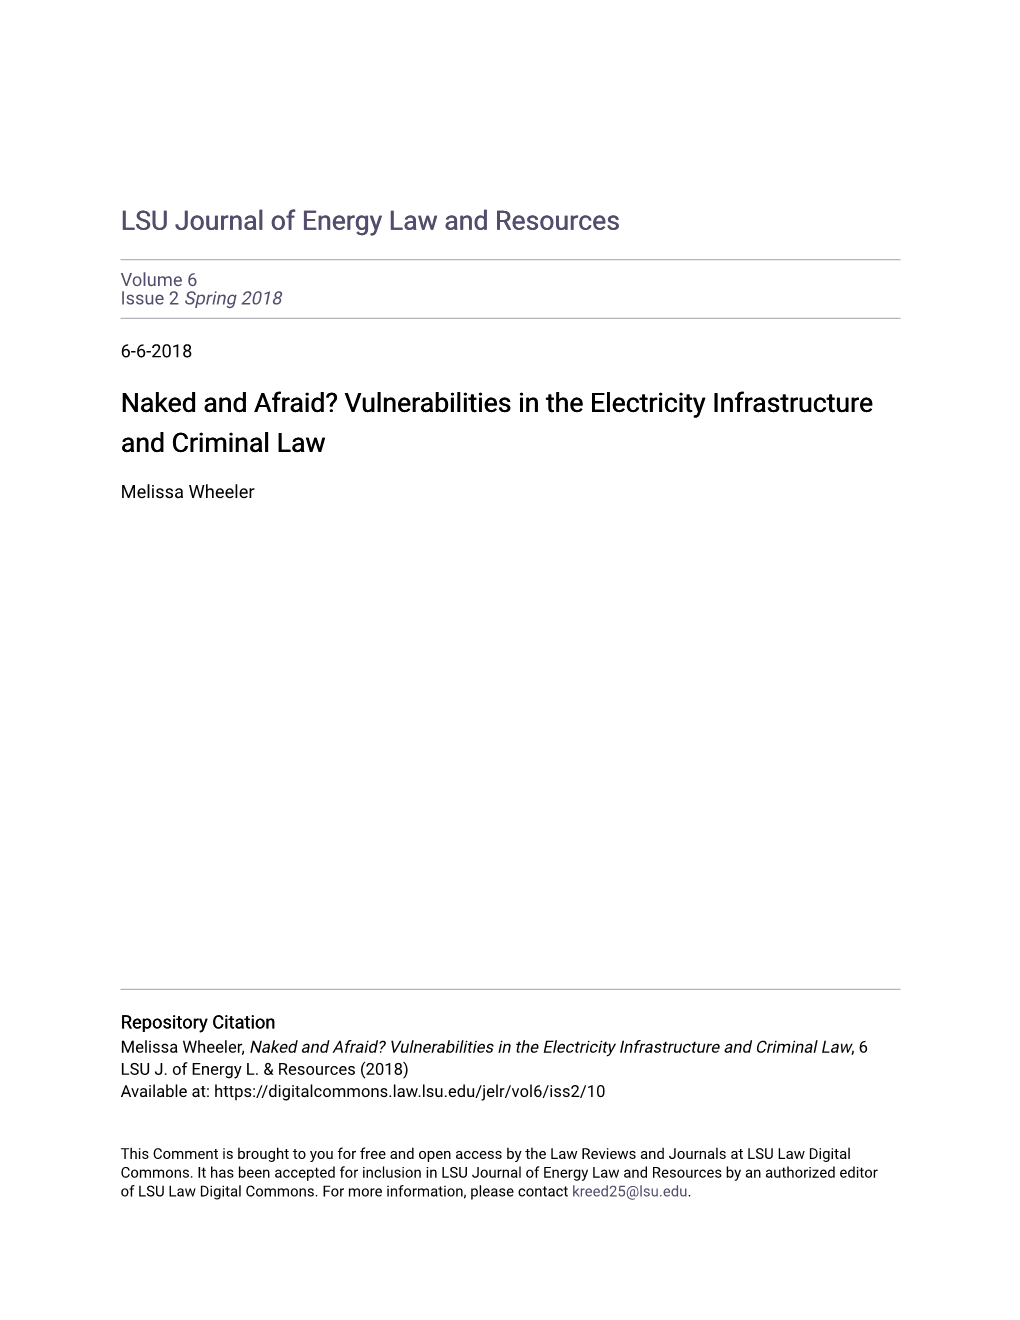 Vulnerabilities in the Electricity Infrastructure and Criminal Law